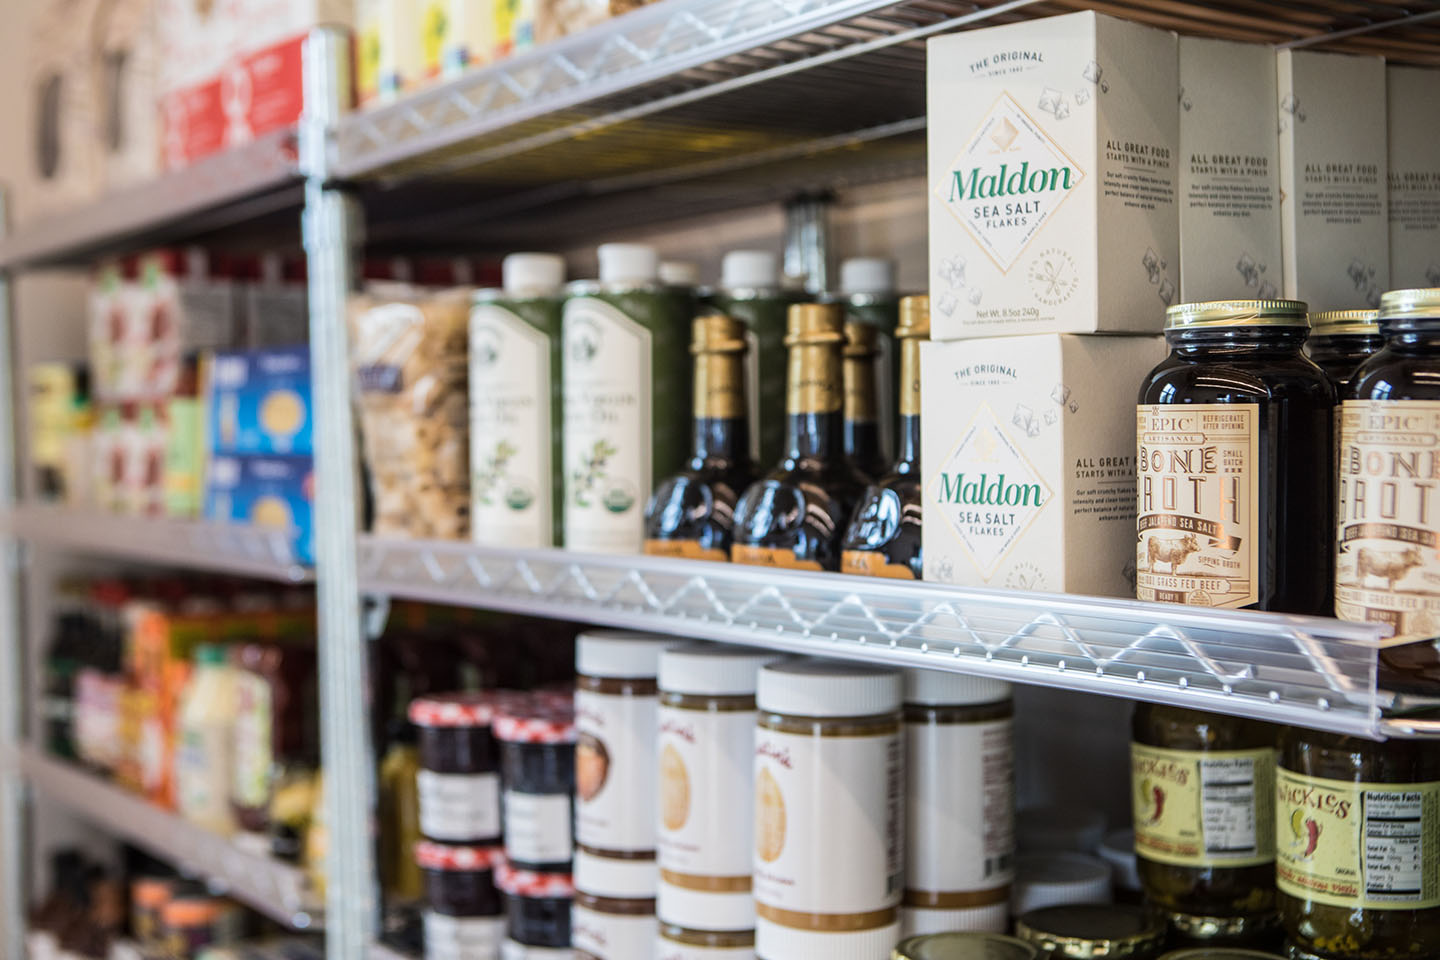 The shelves of Walsh Village Market stocked with pantry staples